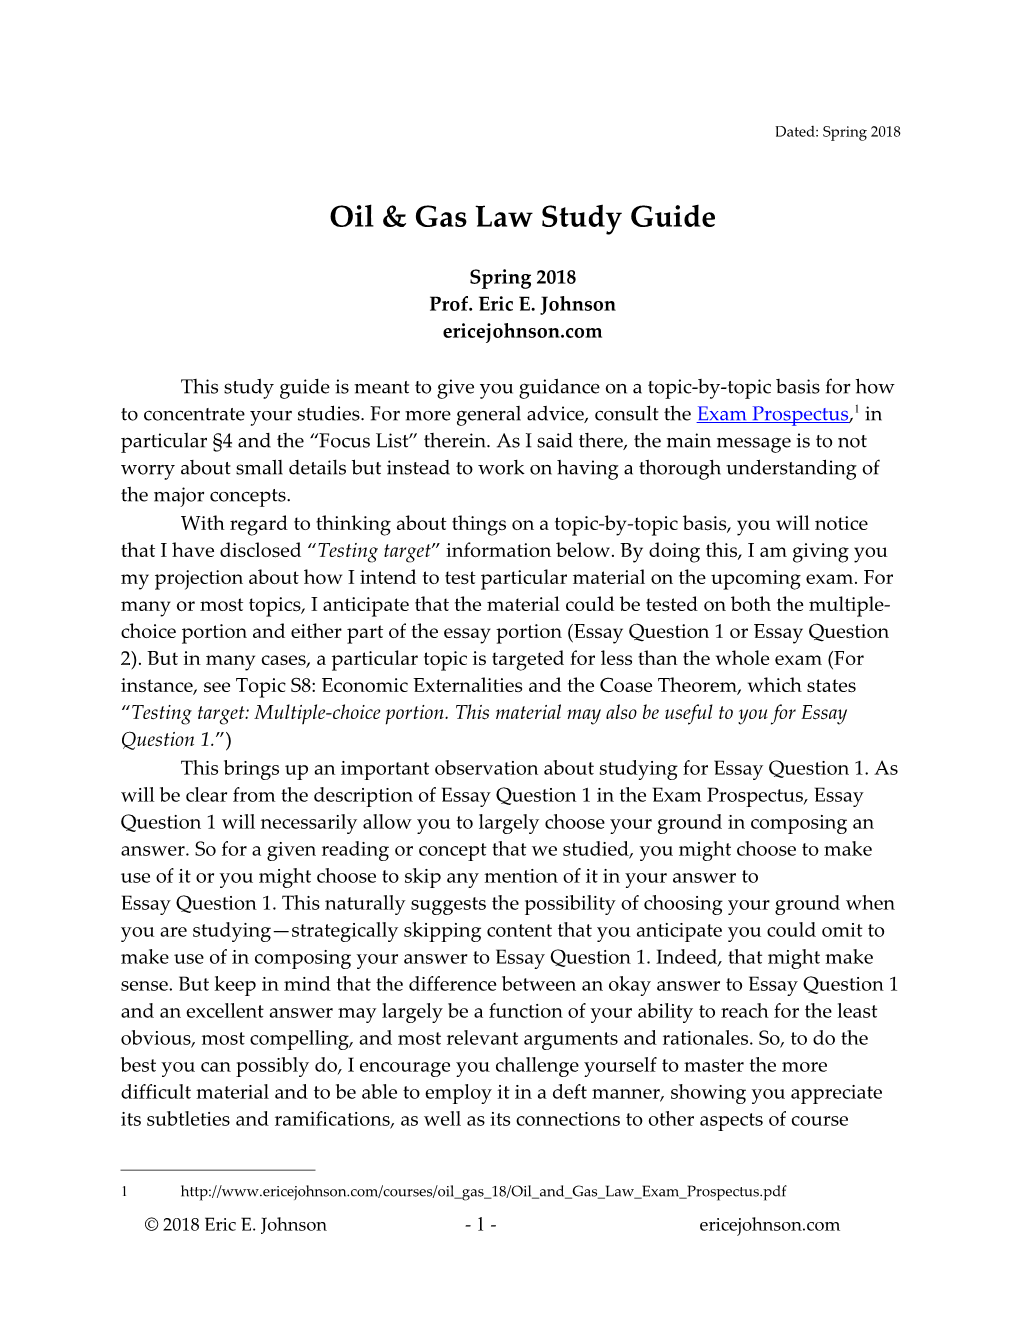 Oil and Gas Law Study Guide